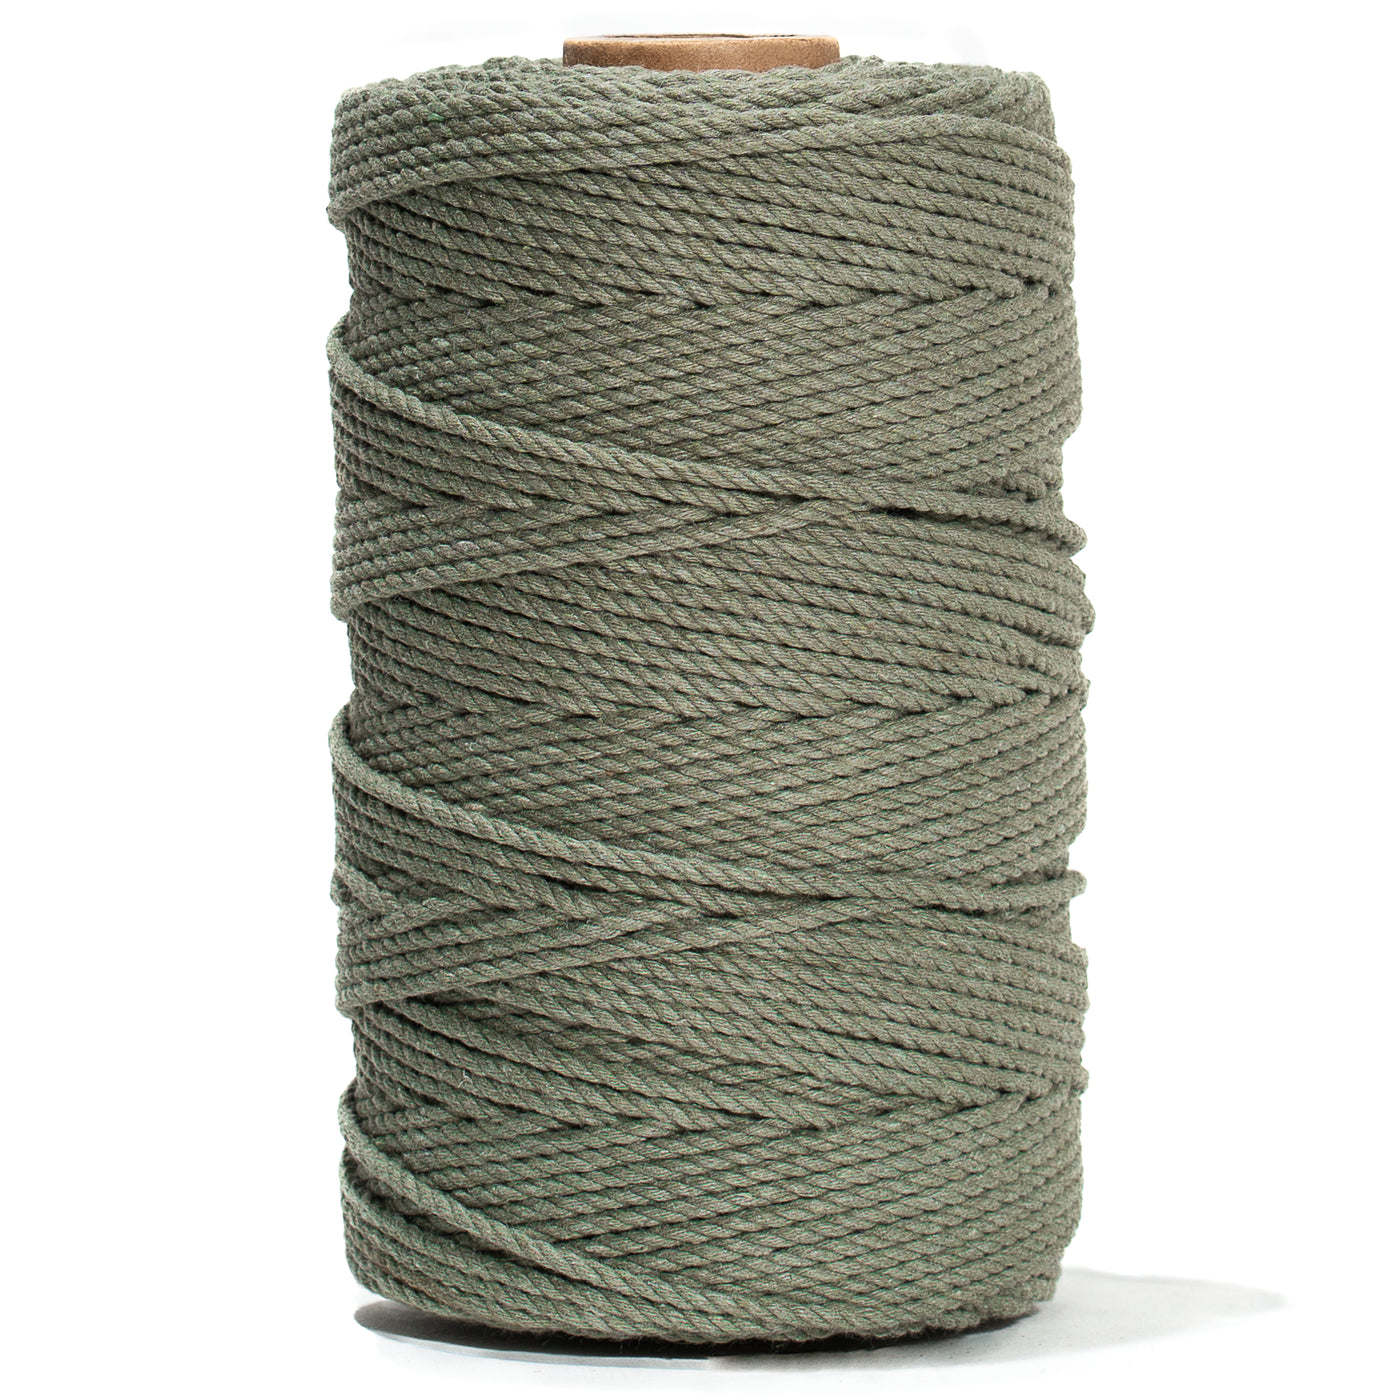 COTTON ROPE ZERO WASTE 2 MM - 3 PLY - BAY LEAF COLOR